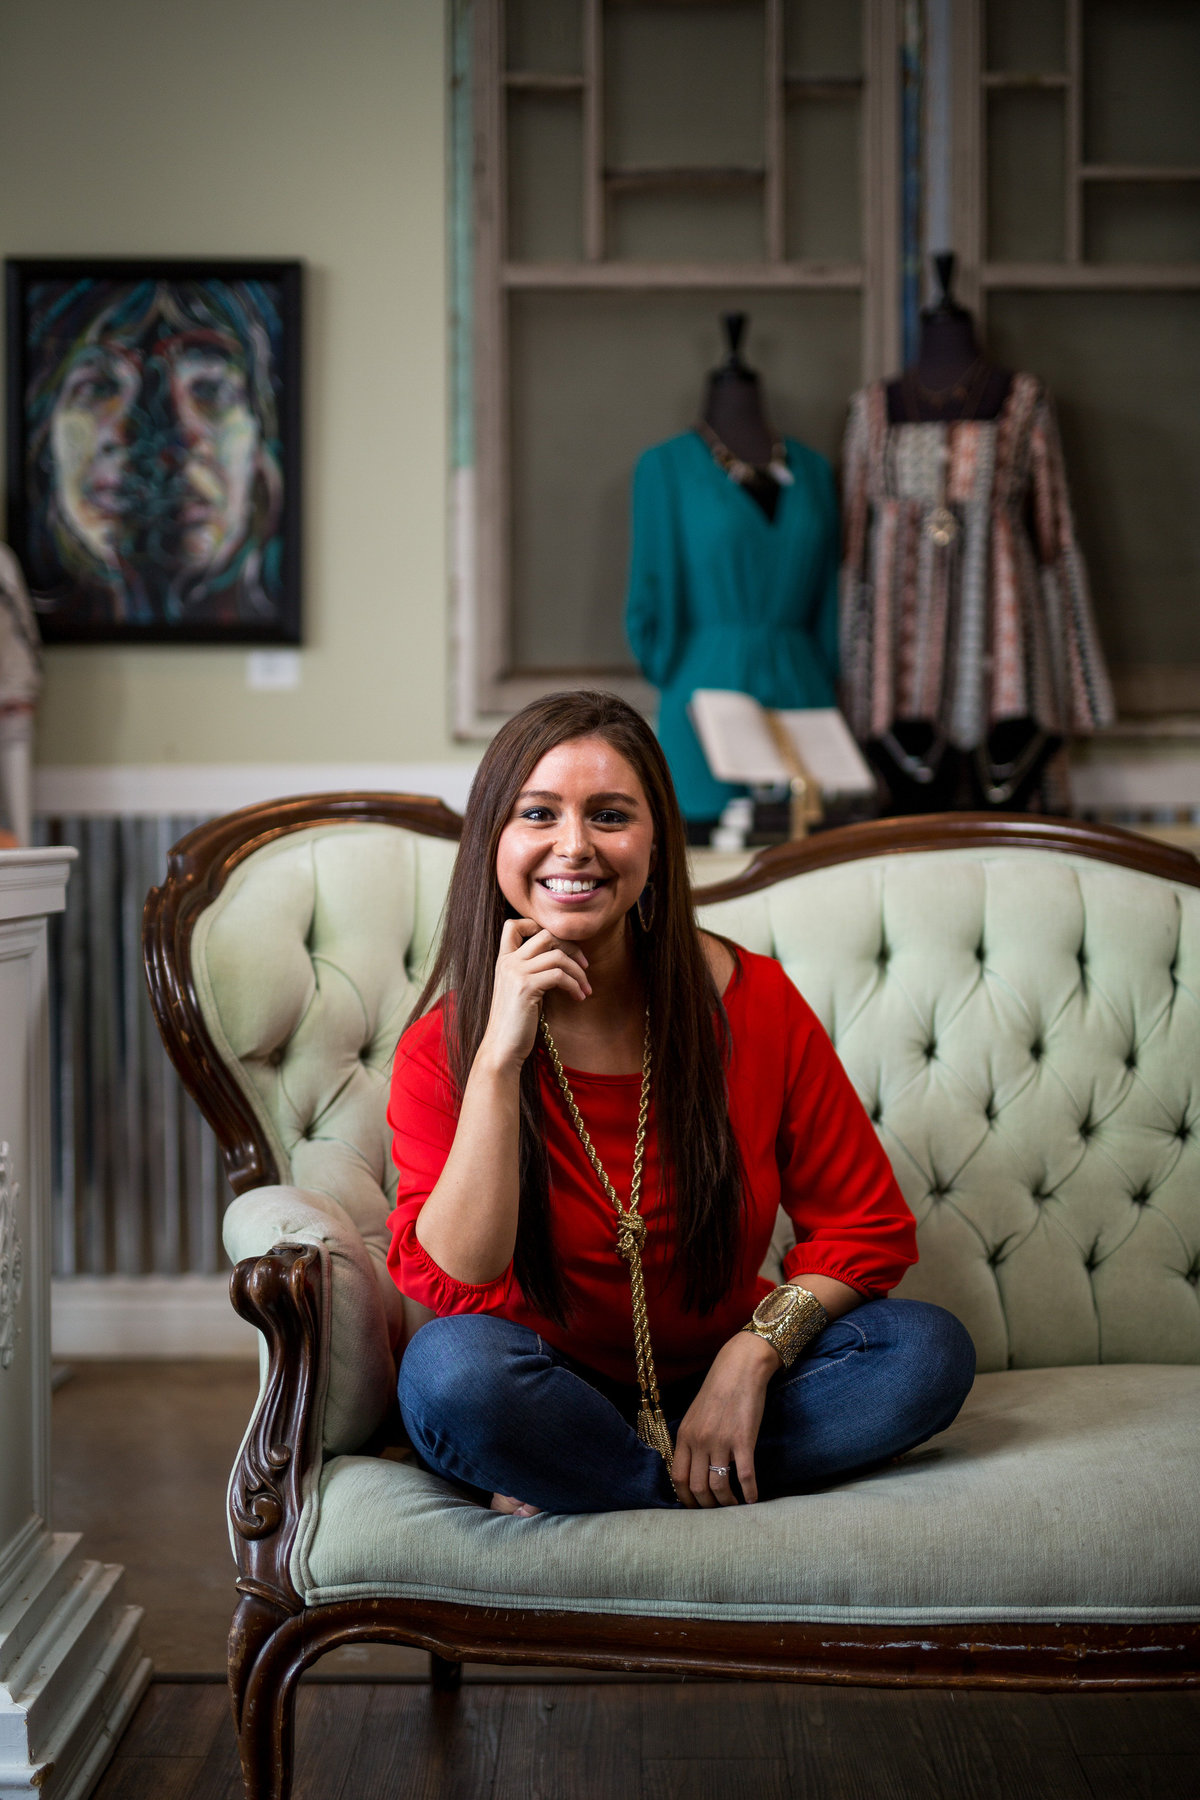 clothing boutique owner portrait on couch taken by San Antonio Photographer Expose The Heart Photography